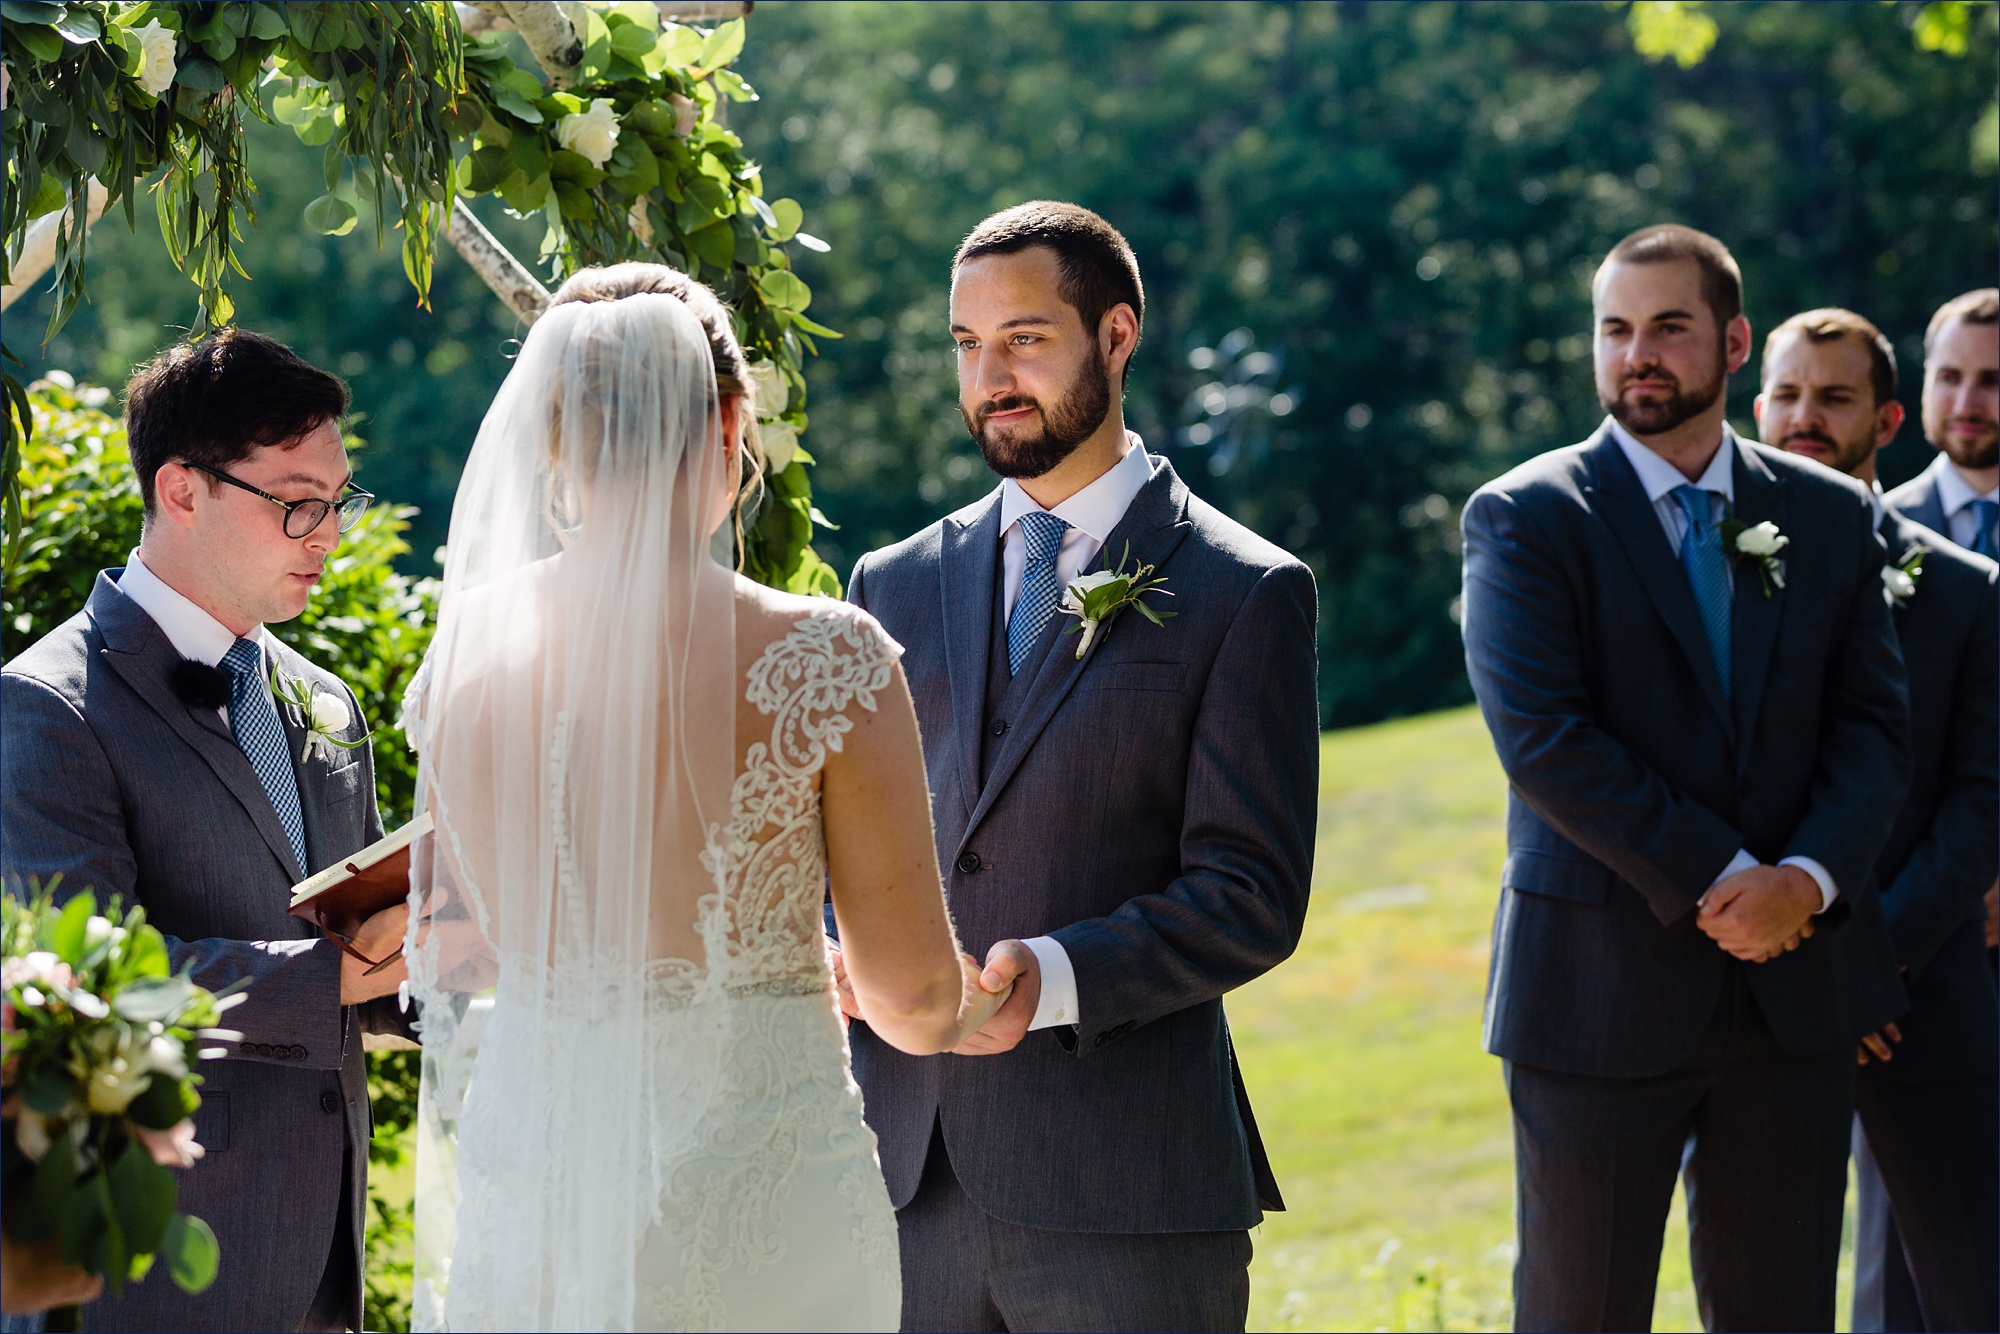 The groom looks lovingly at the bride while at their New Hampshire wedding